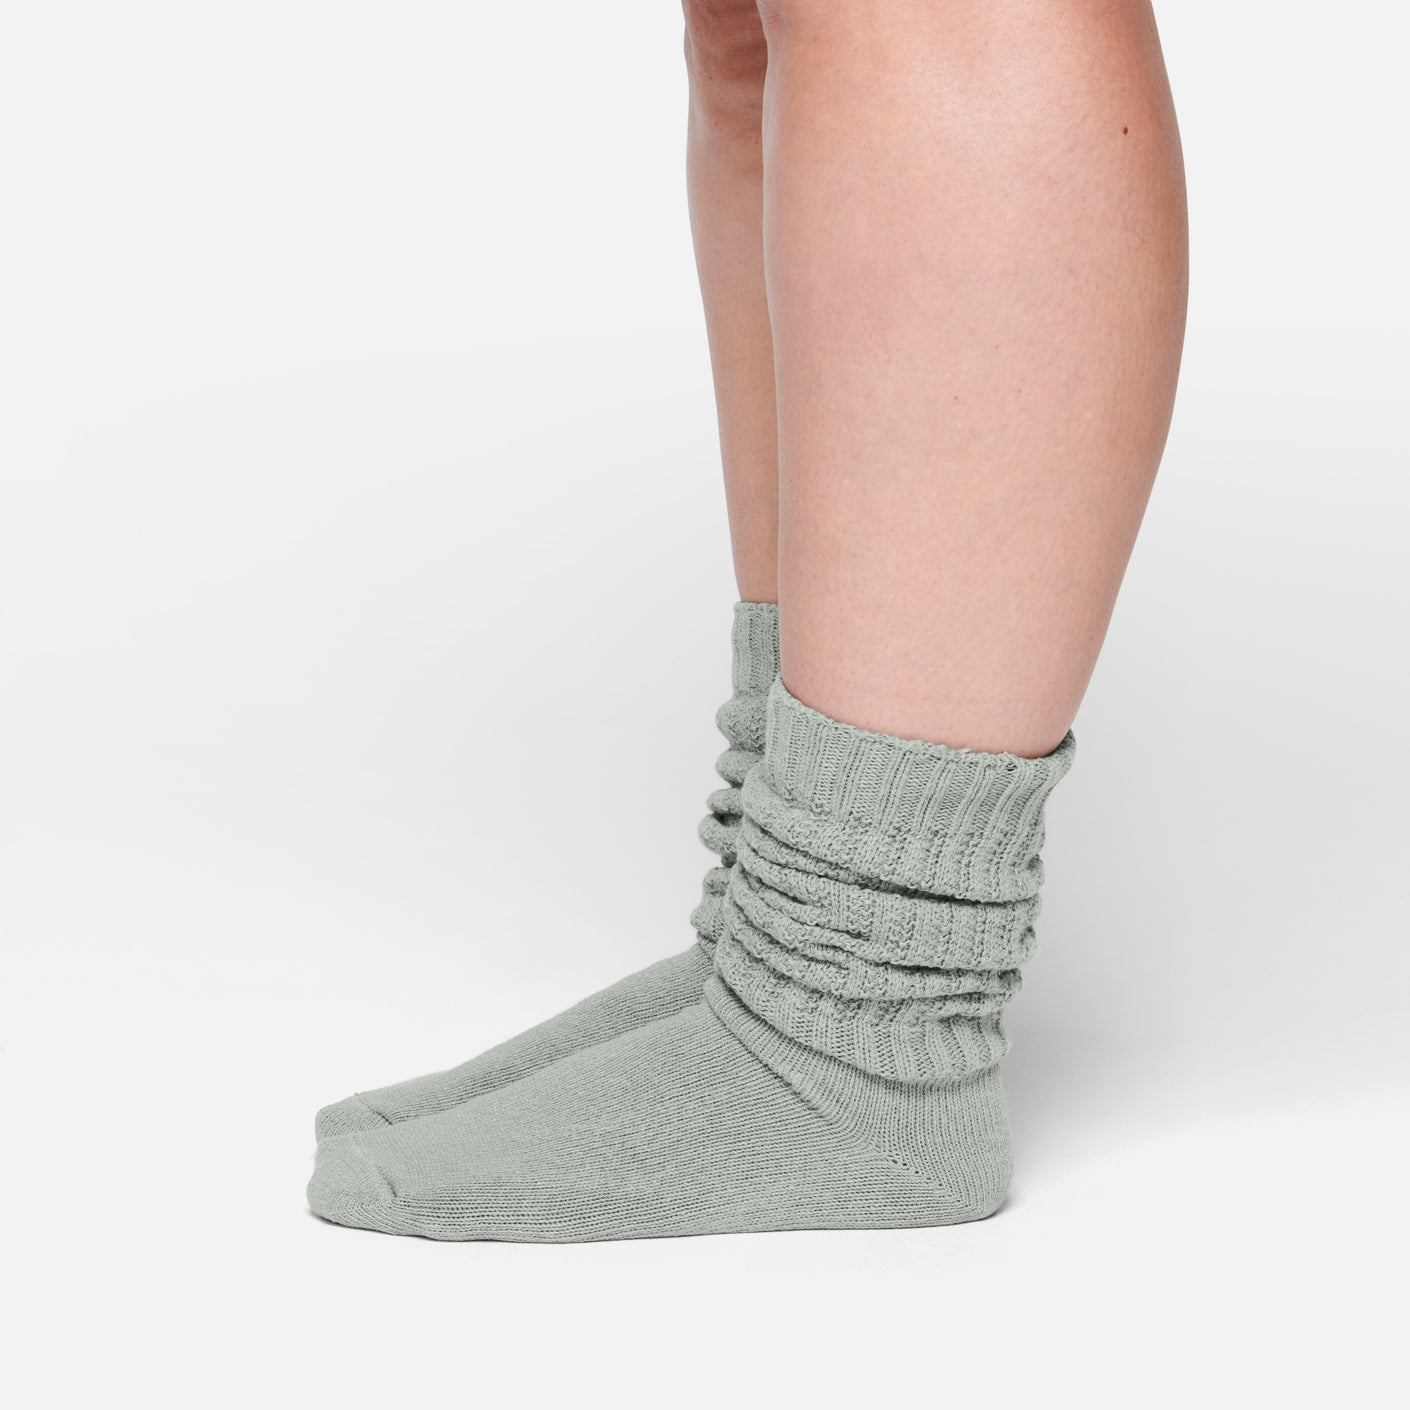 Non-Slip, Stay-on Bootie Bundle + Stay-on Socks + Cable Knit